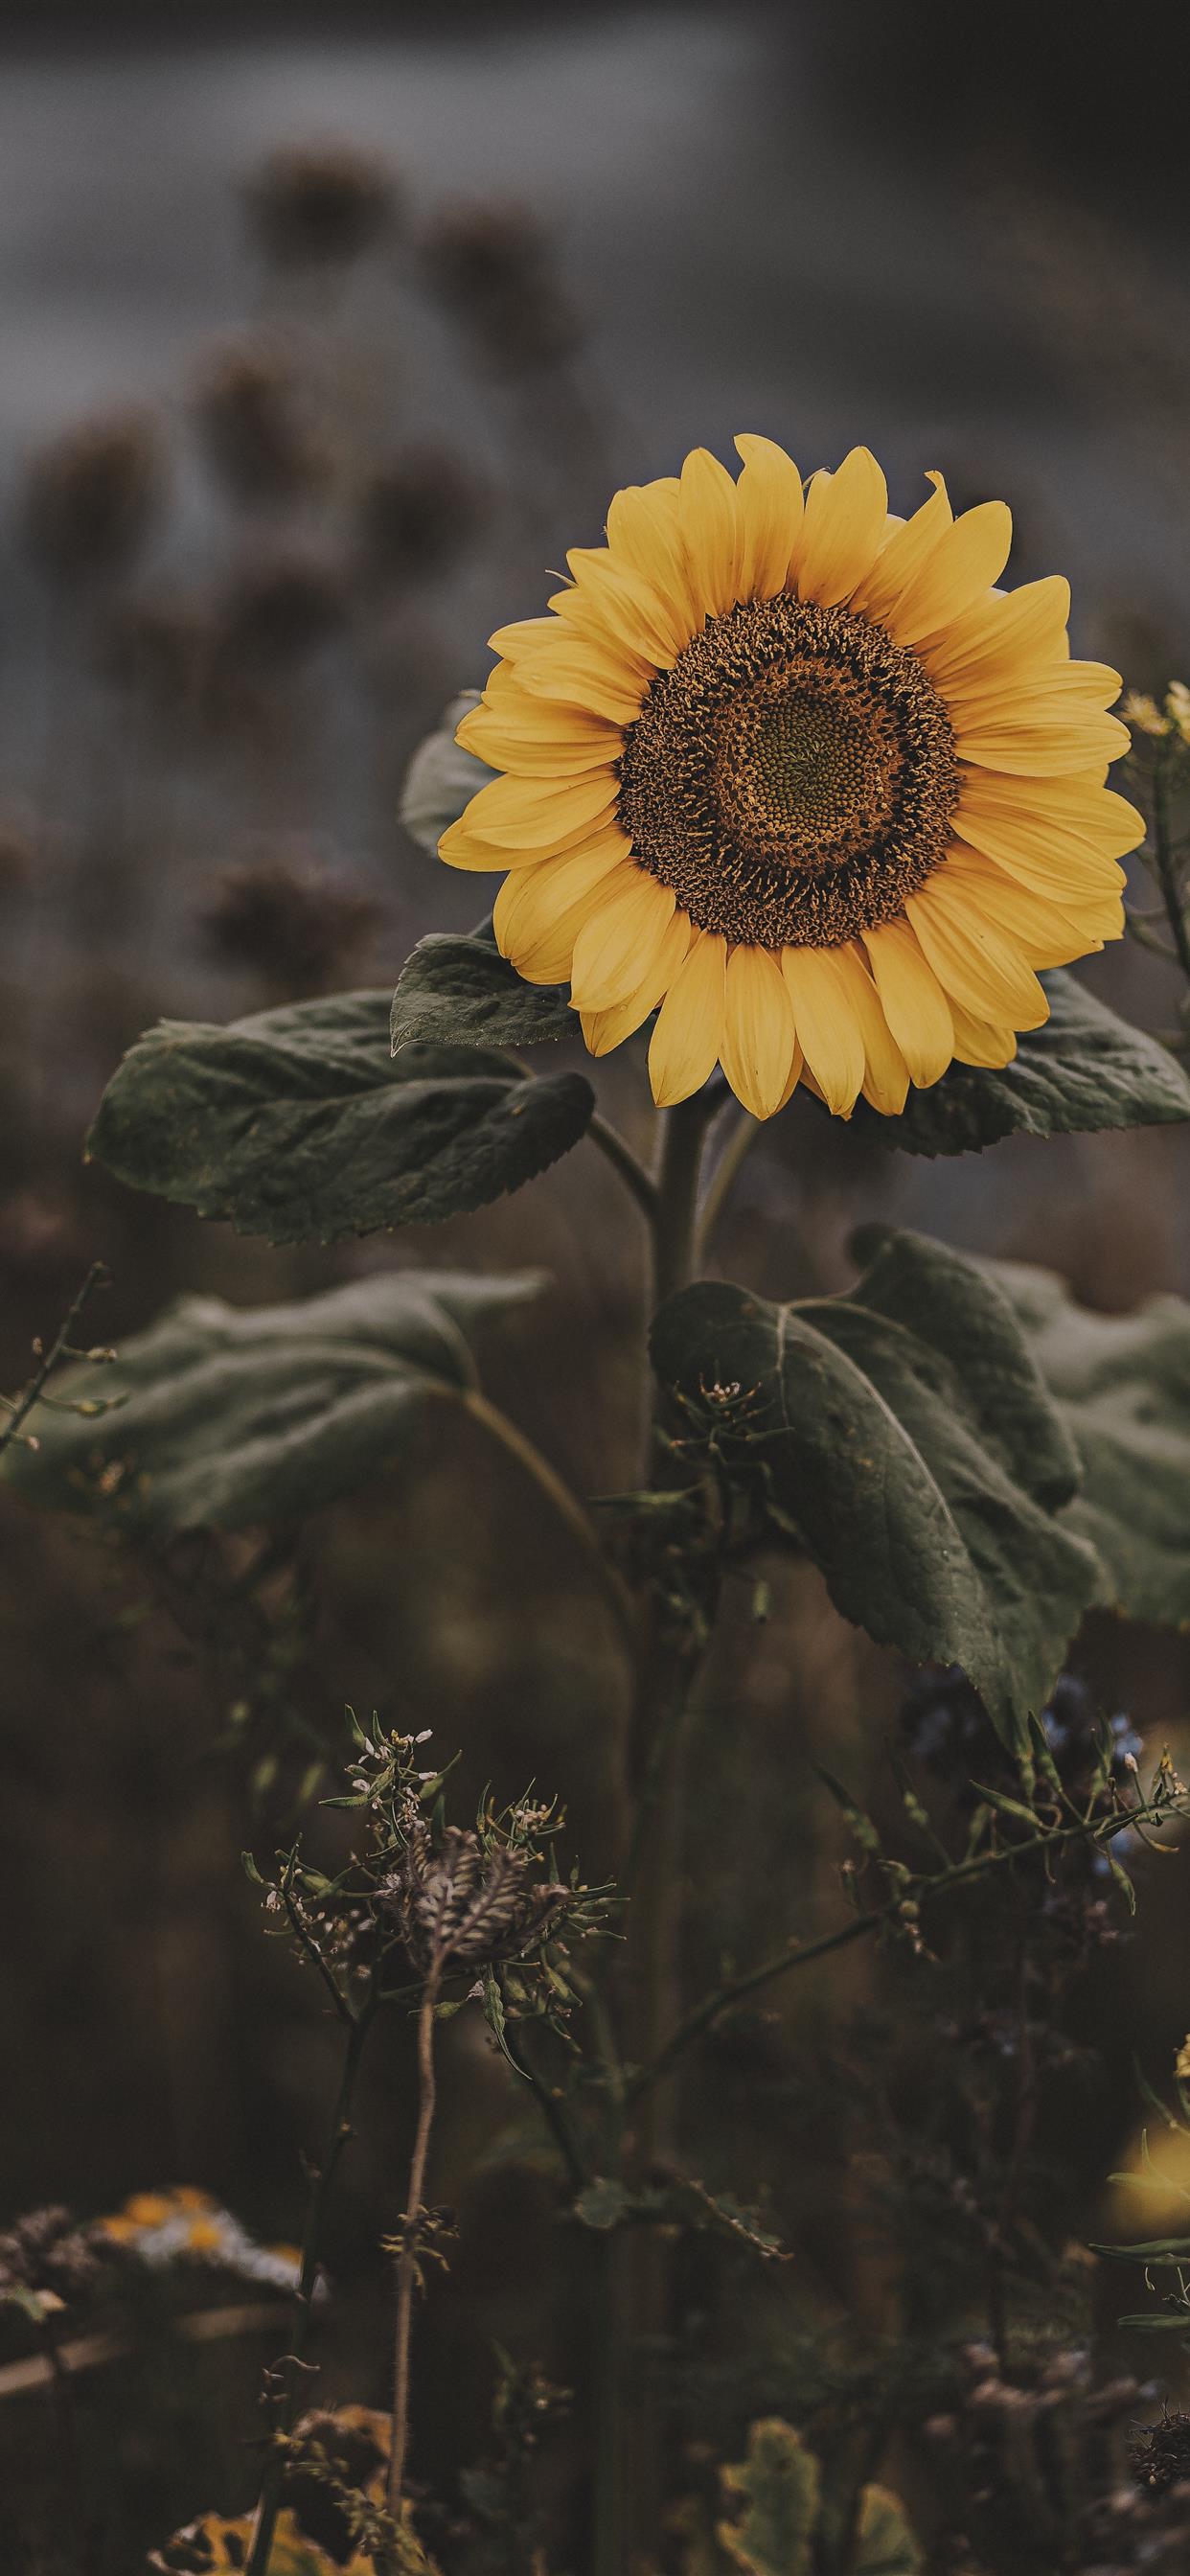 Sunflowers - Idea Wallpapers , iPhone Wallpapers,Color Schemes